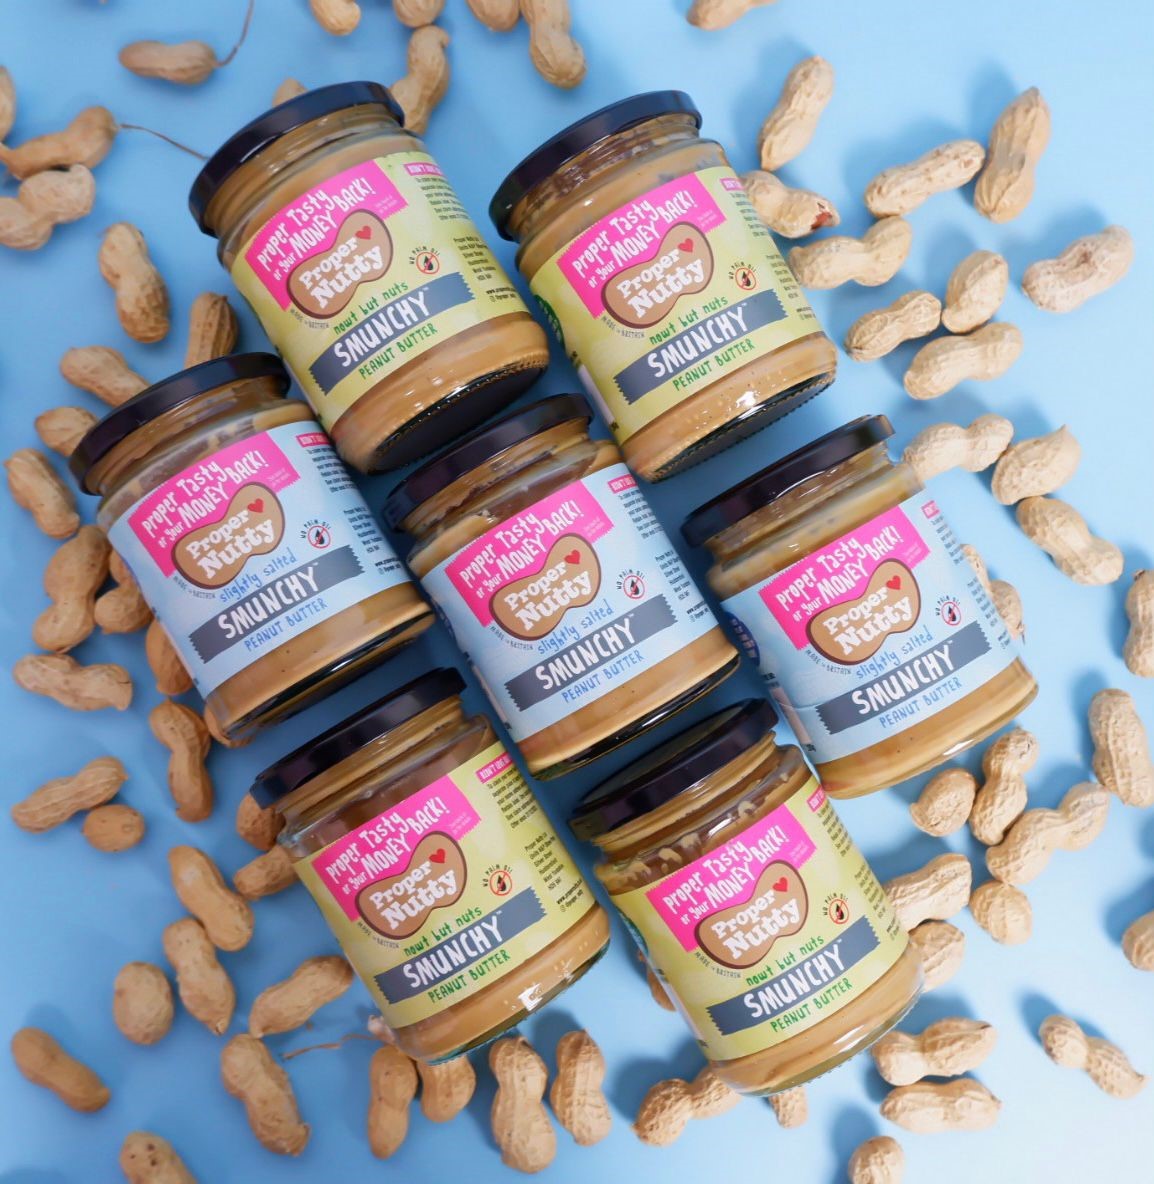 Why is Peanut Butter so Satisfying to Eat?